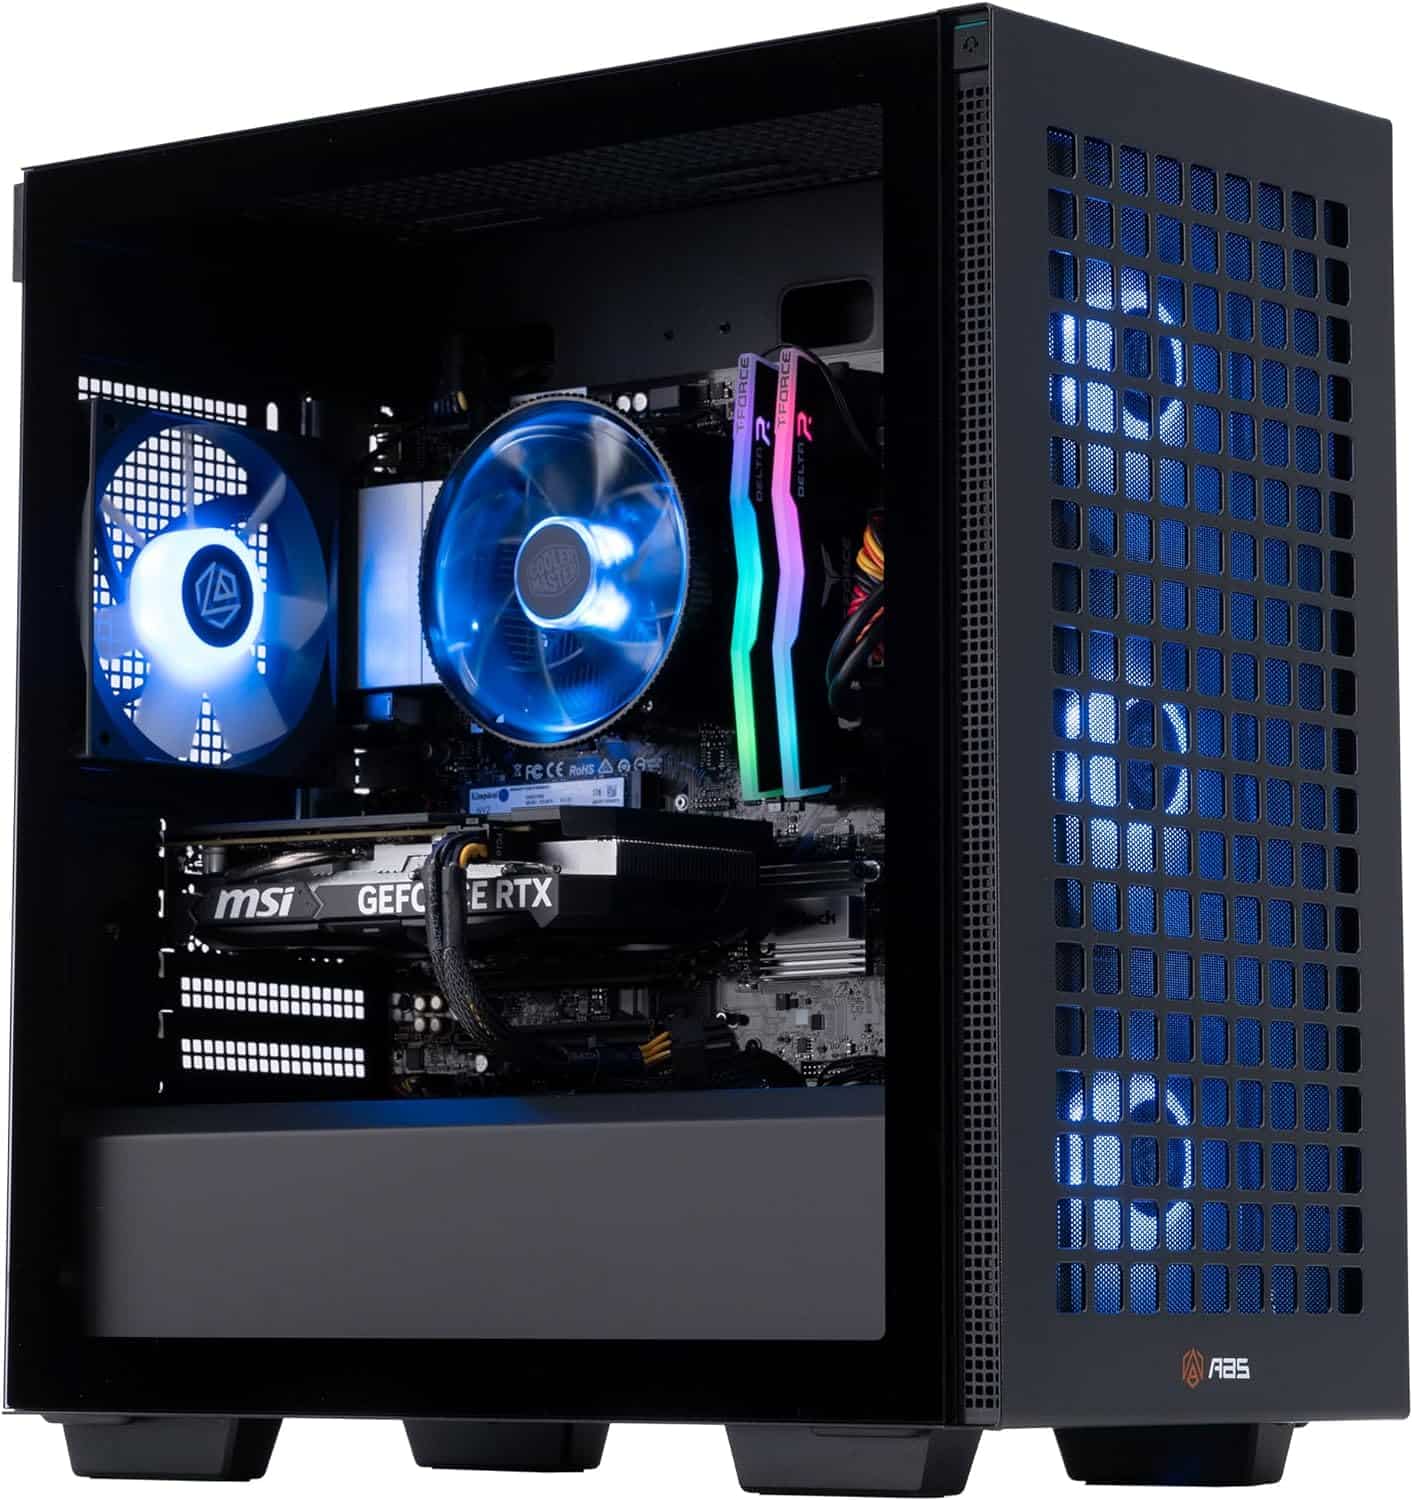 Custom Water Cooling: Keeping Your Gaming Rig Ice Cold with CLX Temper